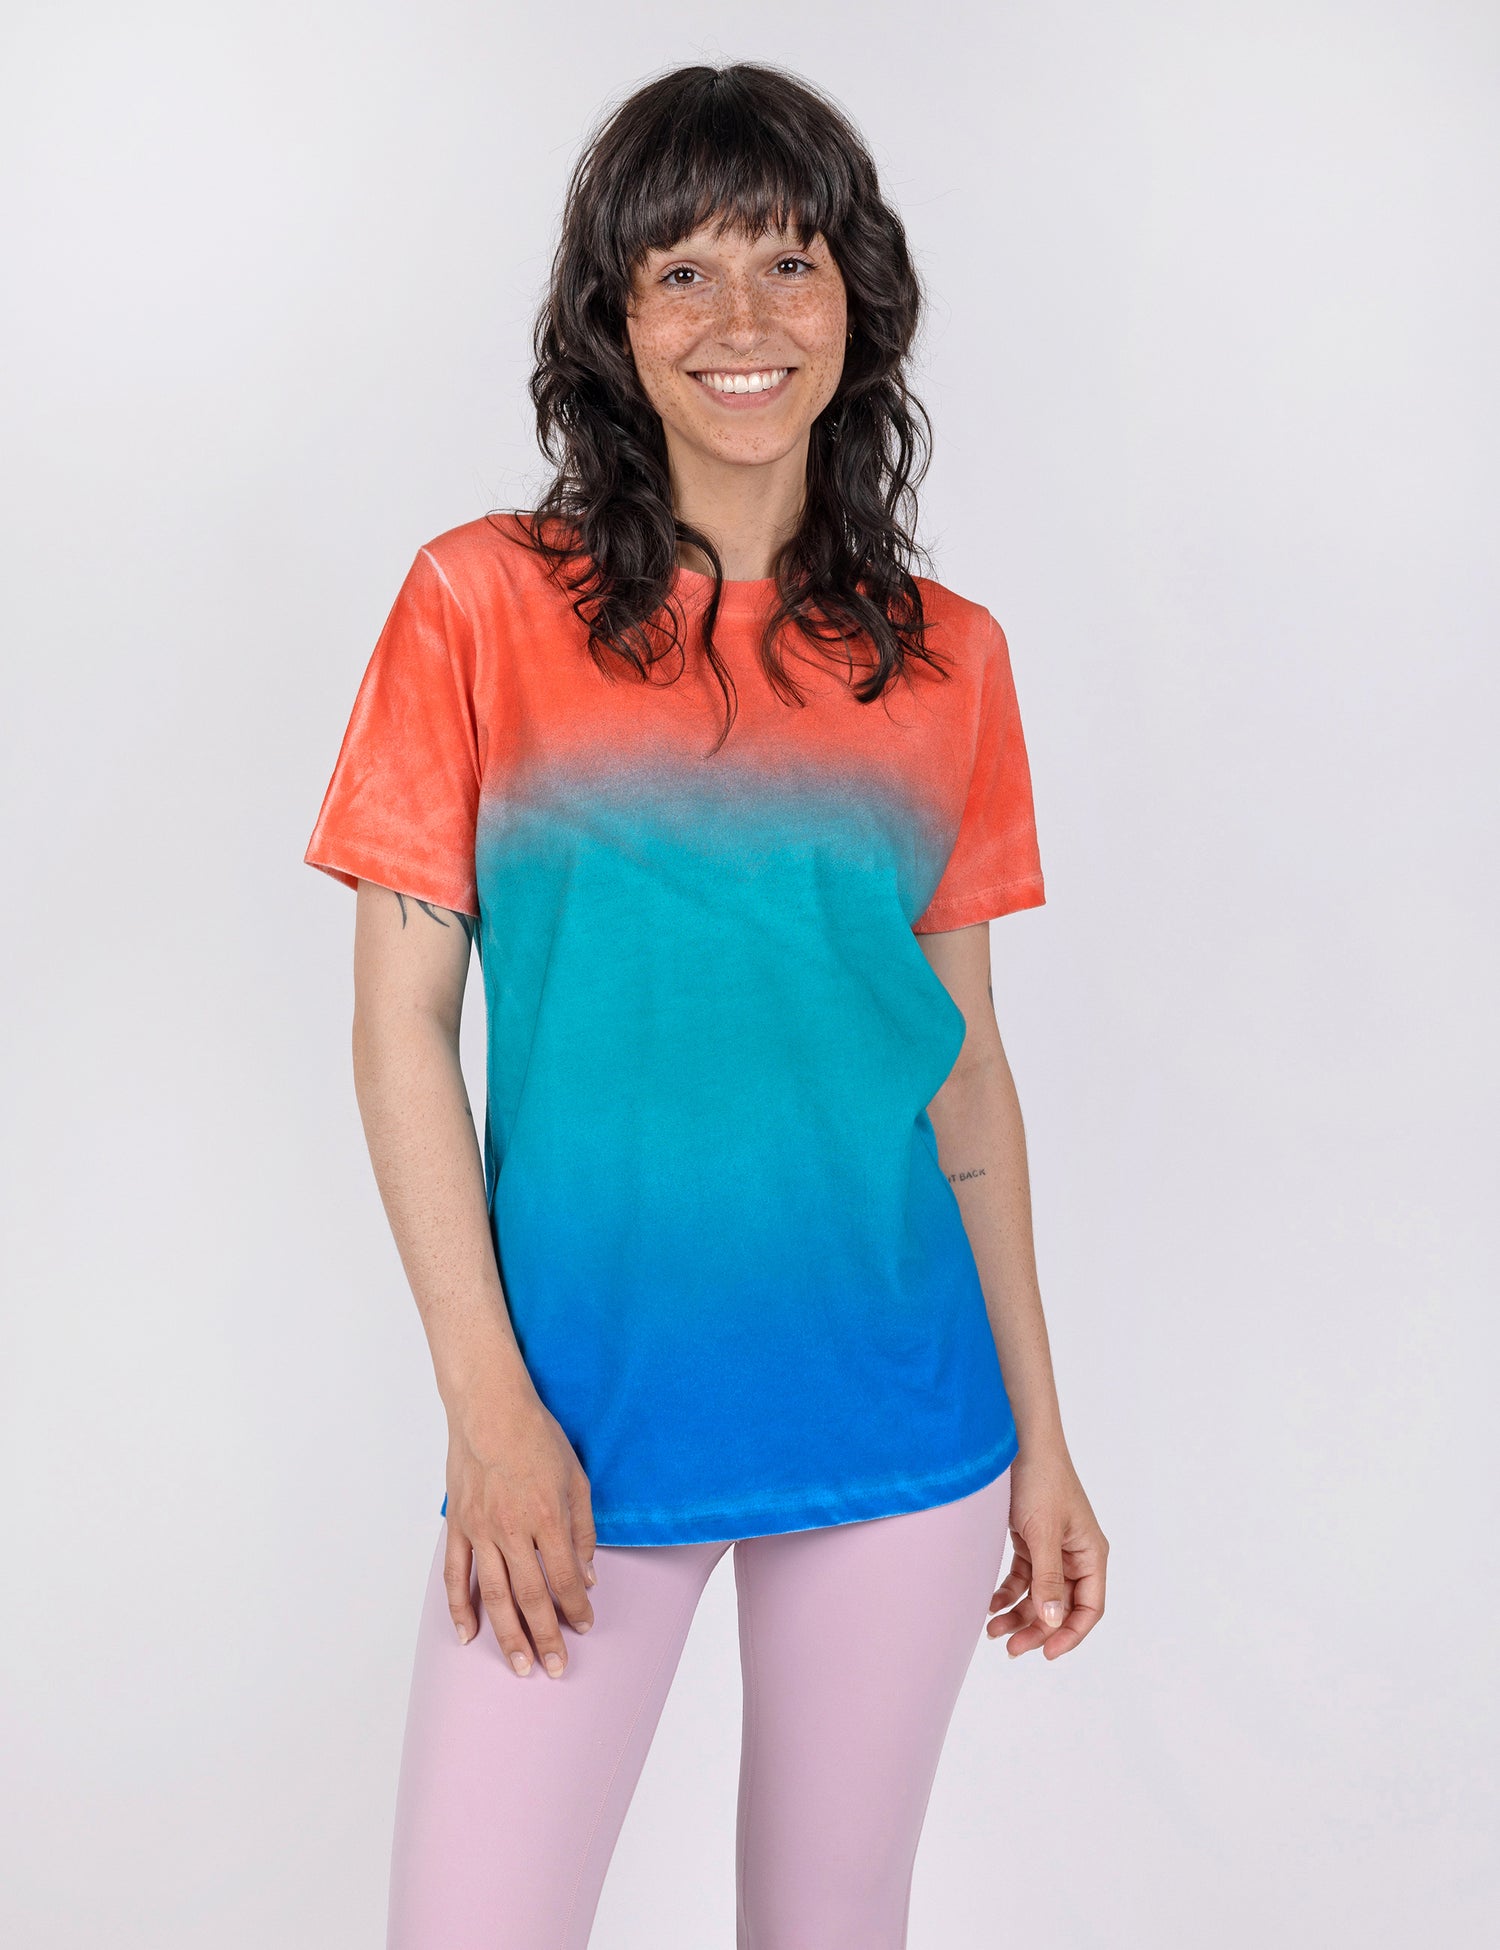 woman wearing a t shirt in gradient designs of red teal and blue